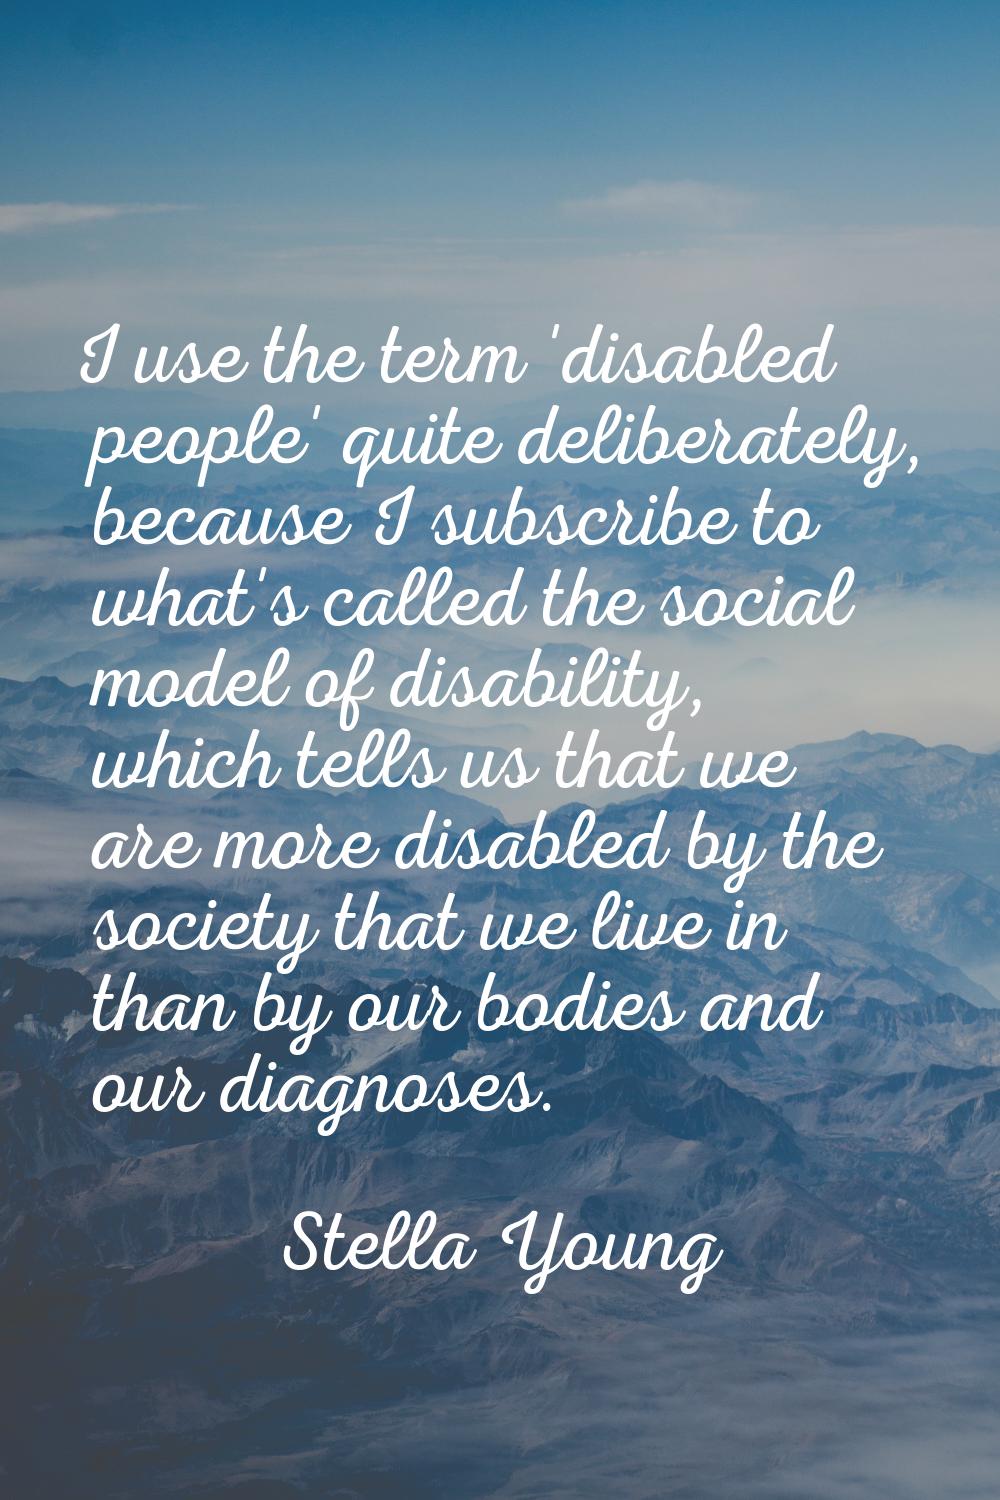 I use the term 'disabled people' quite deliberately, because I subscribe to what's called the socia